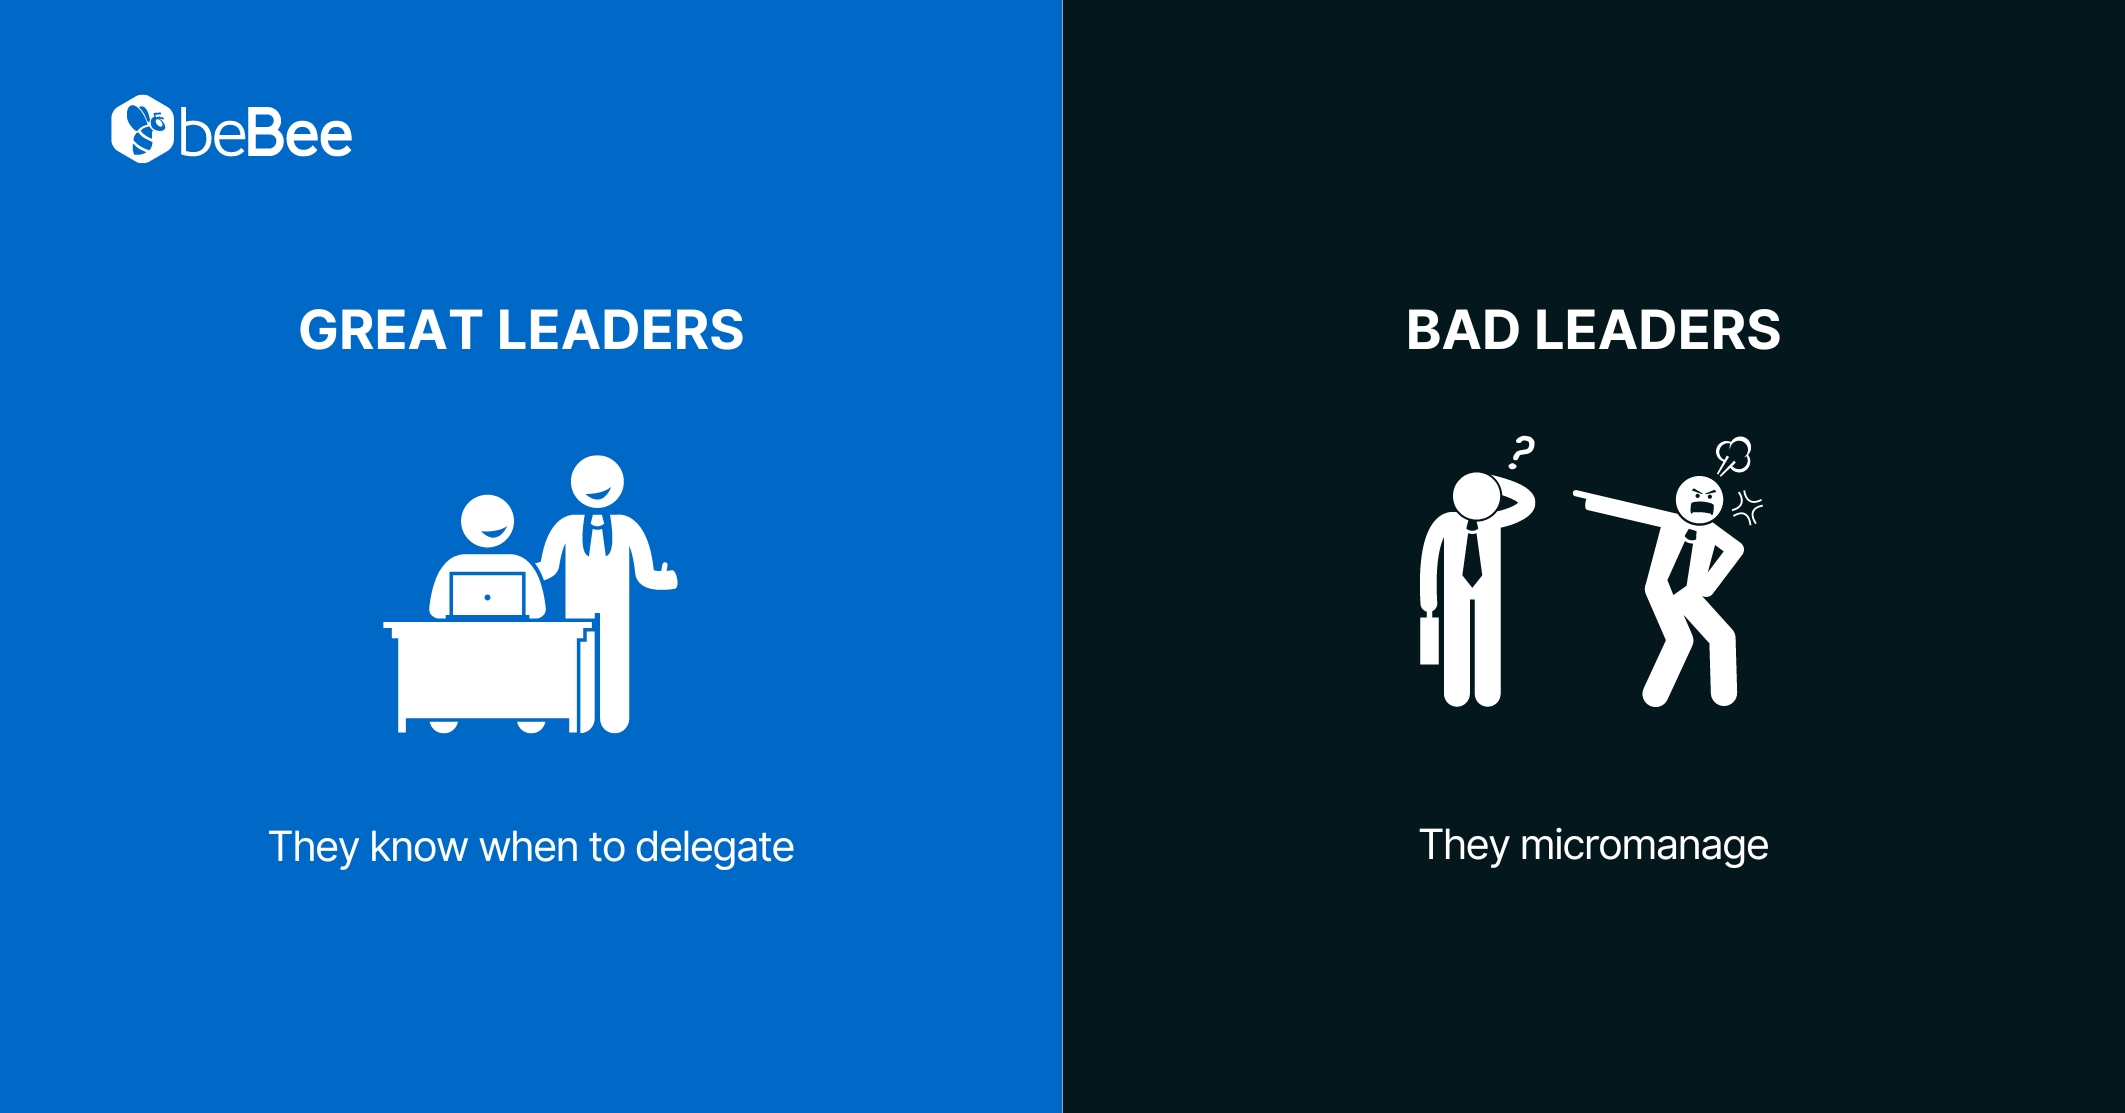 ©beBee

GREAT LEADERS BAD LEADERS
I A
[) (= 25

 

They know when to delegate They micromanage